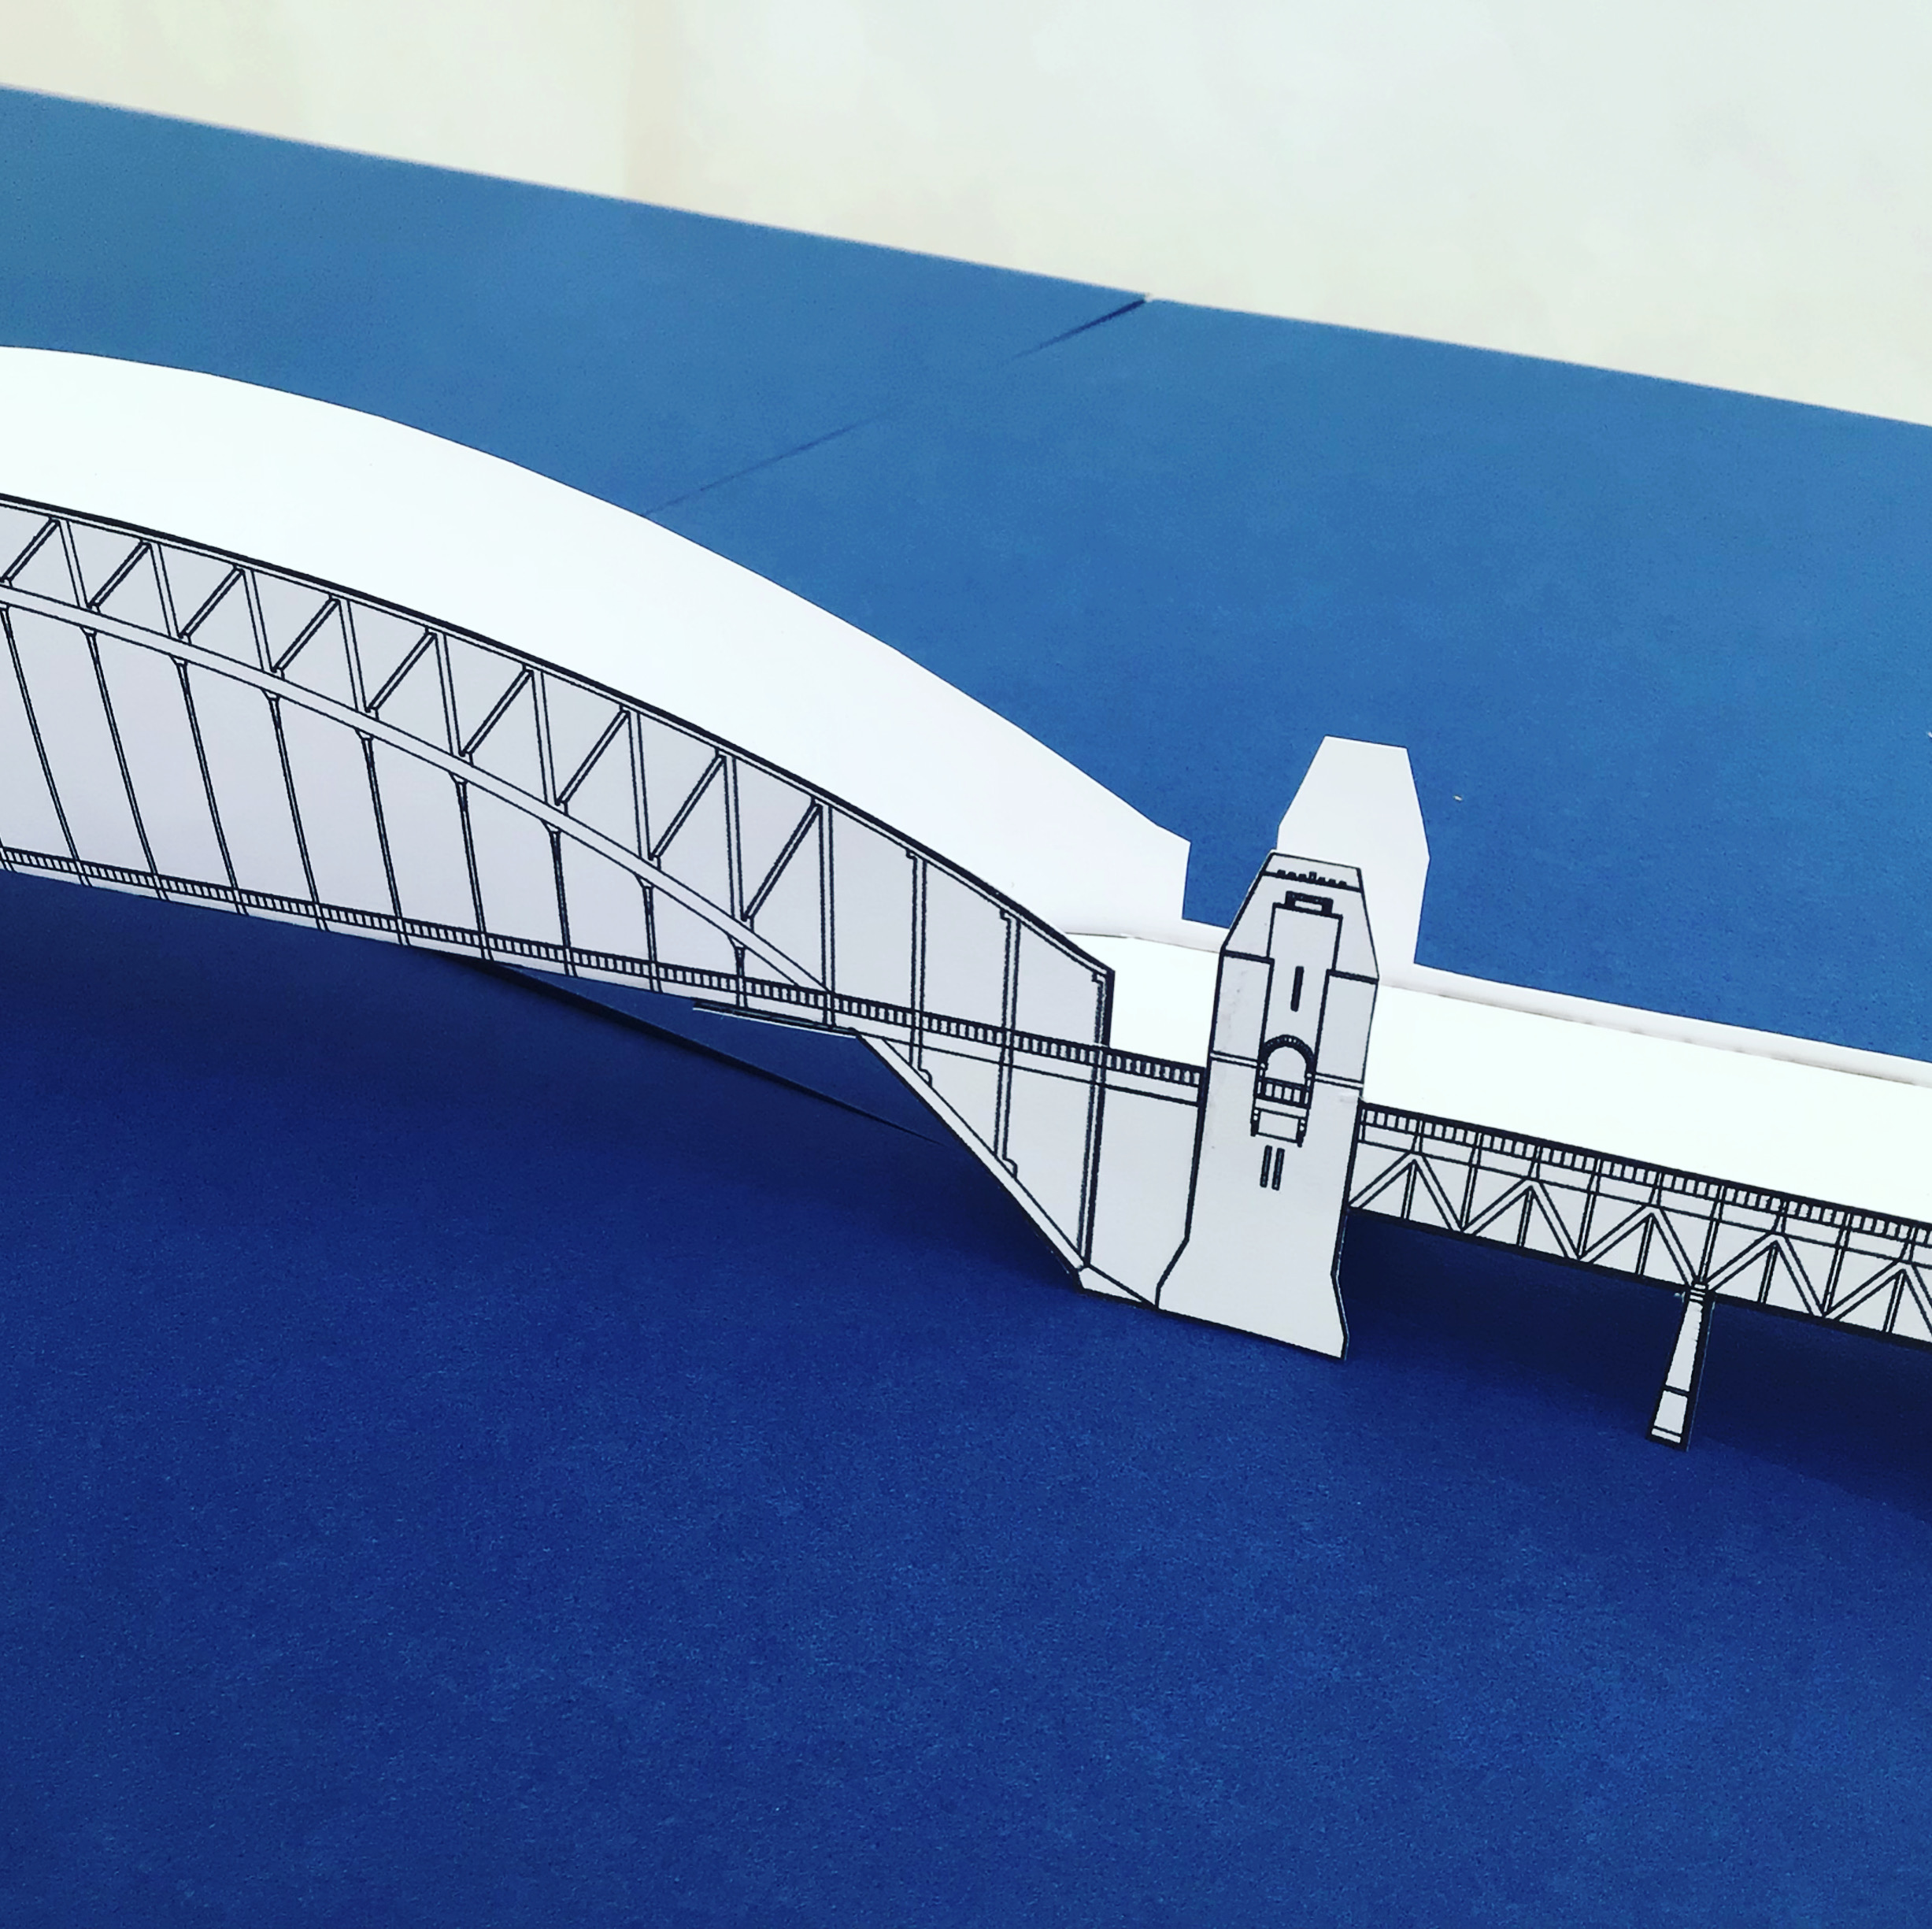 Paper toy architecture model of Sydney Harbour Bridge constructed by British firm Dorman Long of Middlesbrough